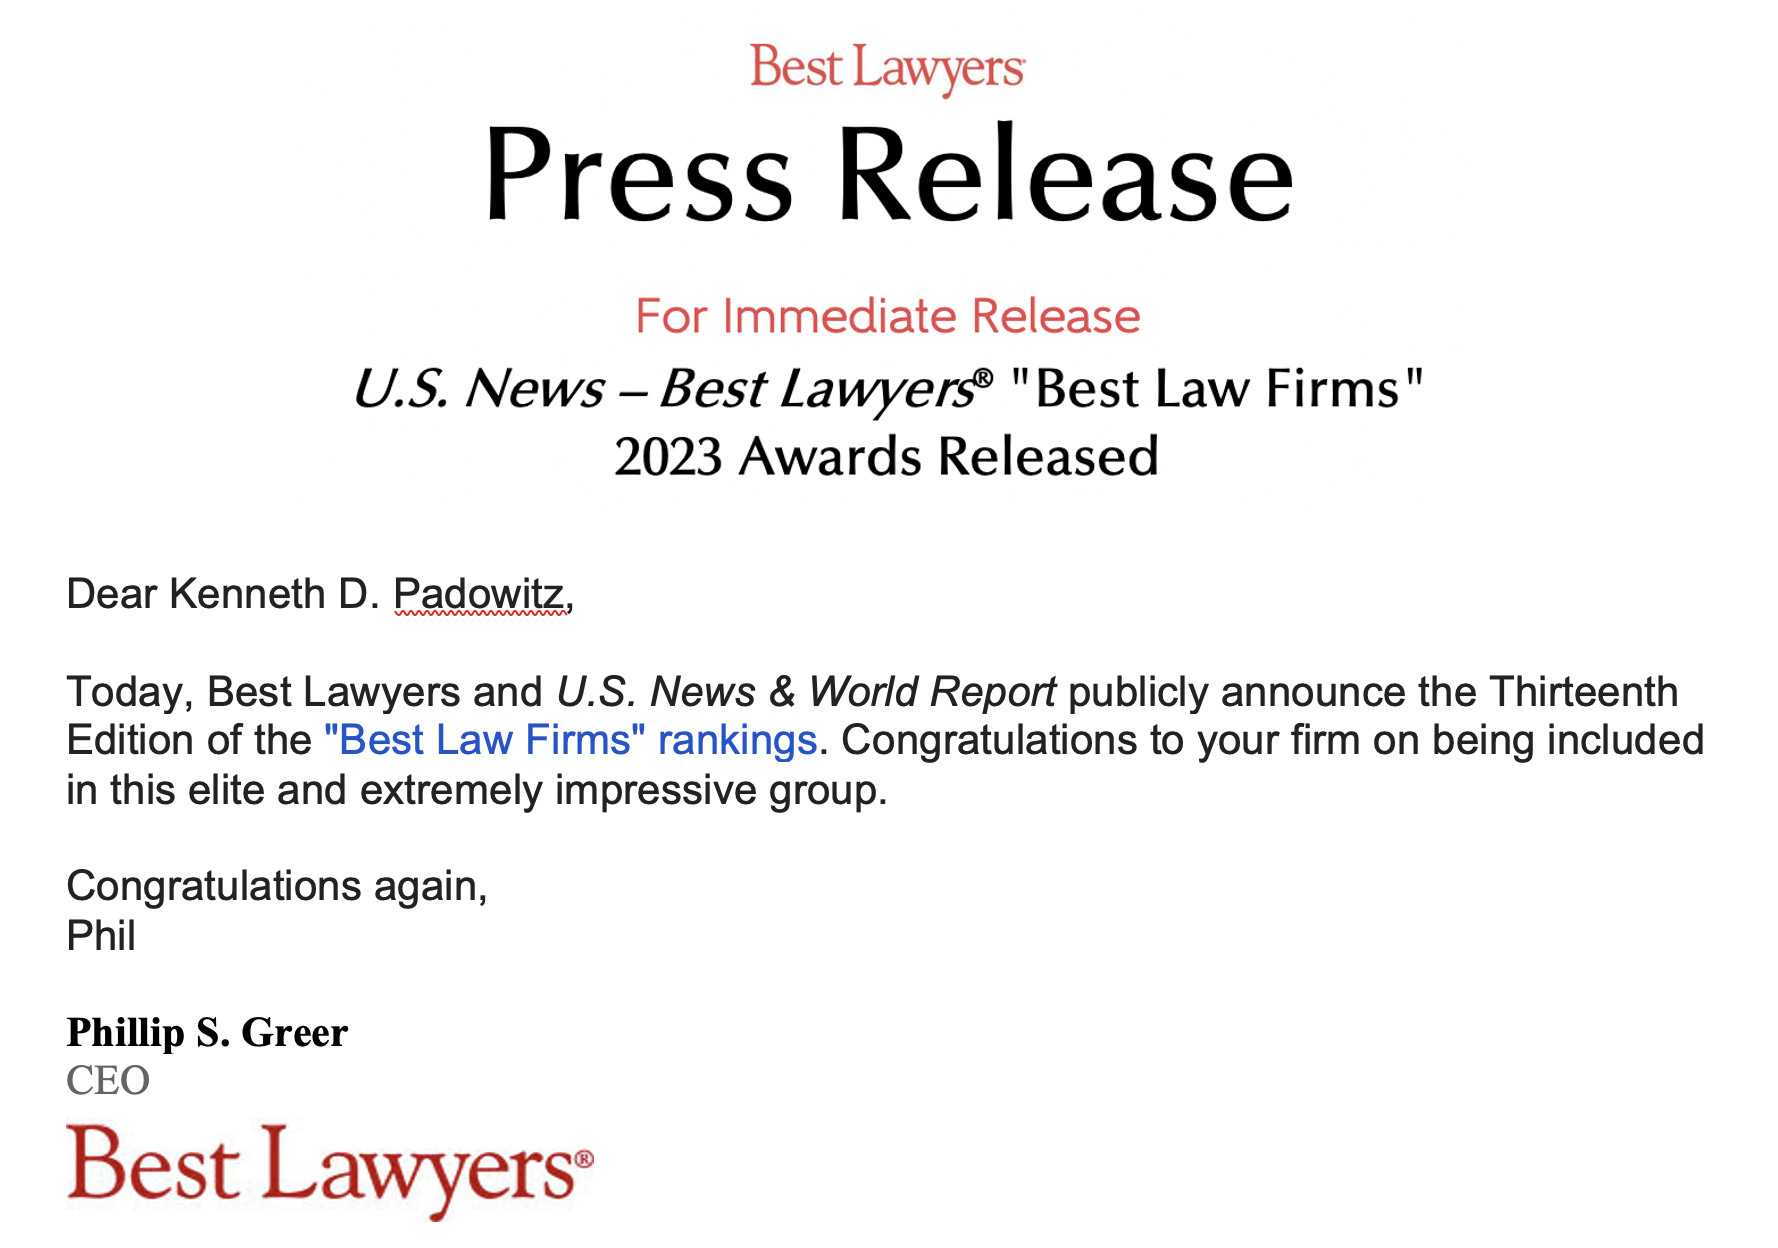 2023 “BEST LAW FIRMS” RANKINGS RELEASED TODAY!